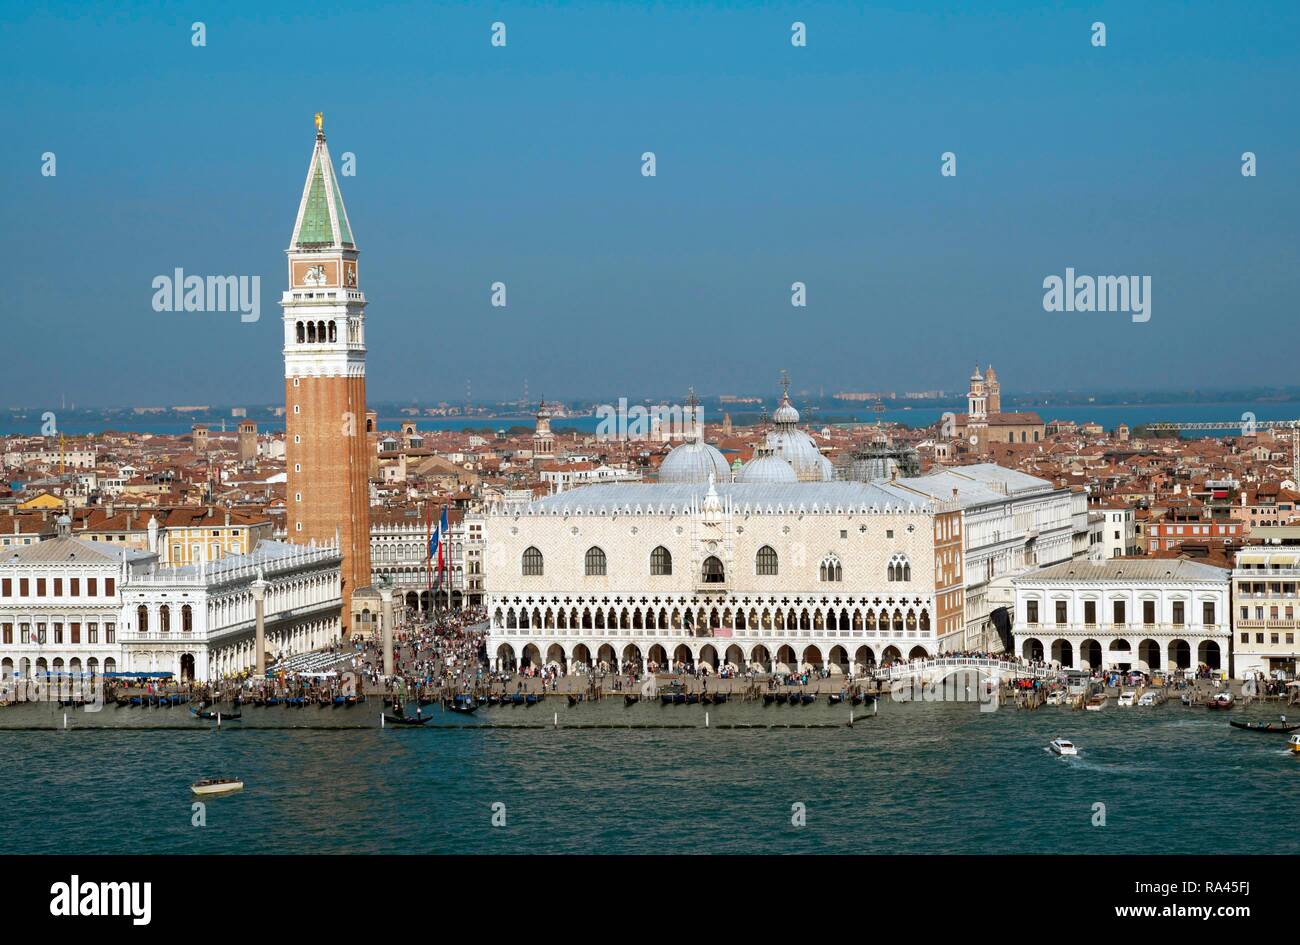 View to St. Mark's Square, Piazza San Marco, with Doge's Palace, Palazzo Ducale and Campanile, Venice, Veneto, Italy Stock Photo